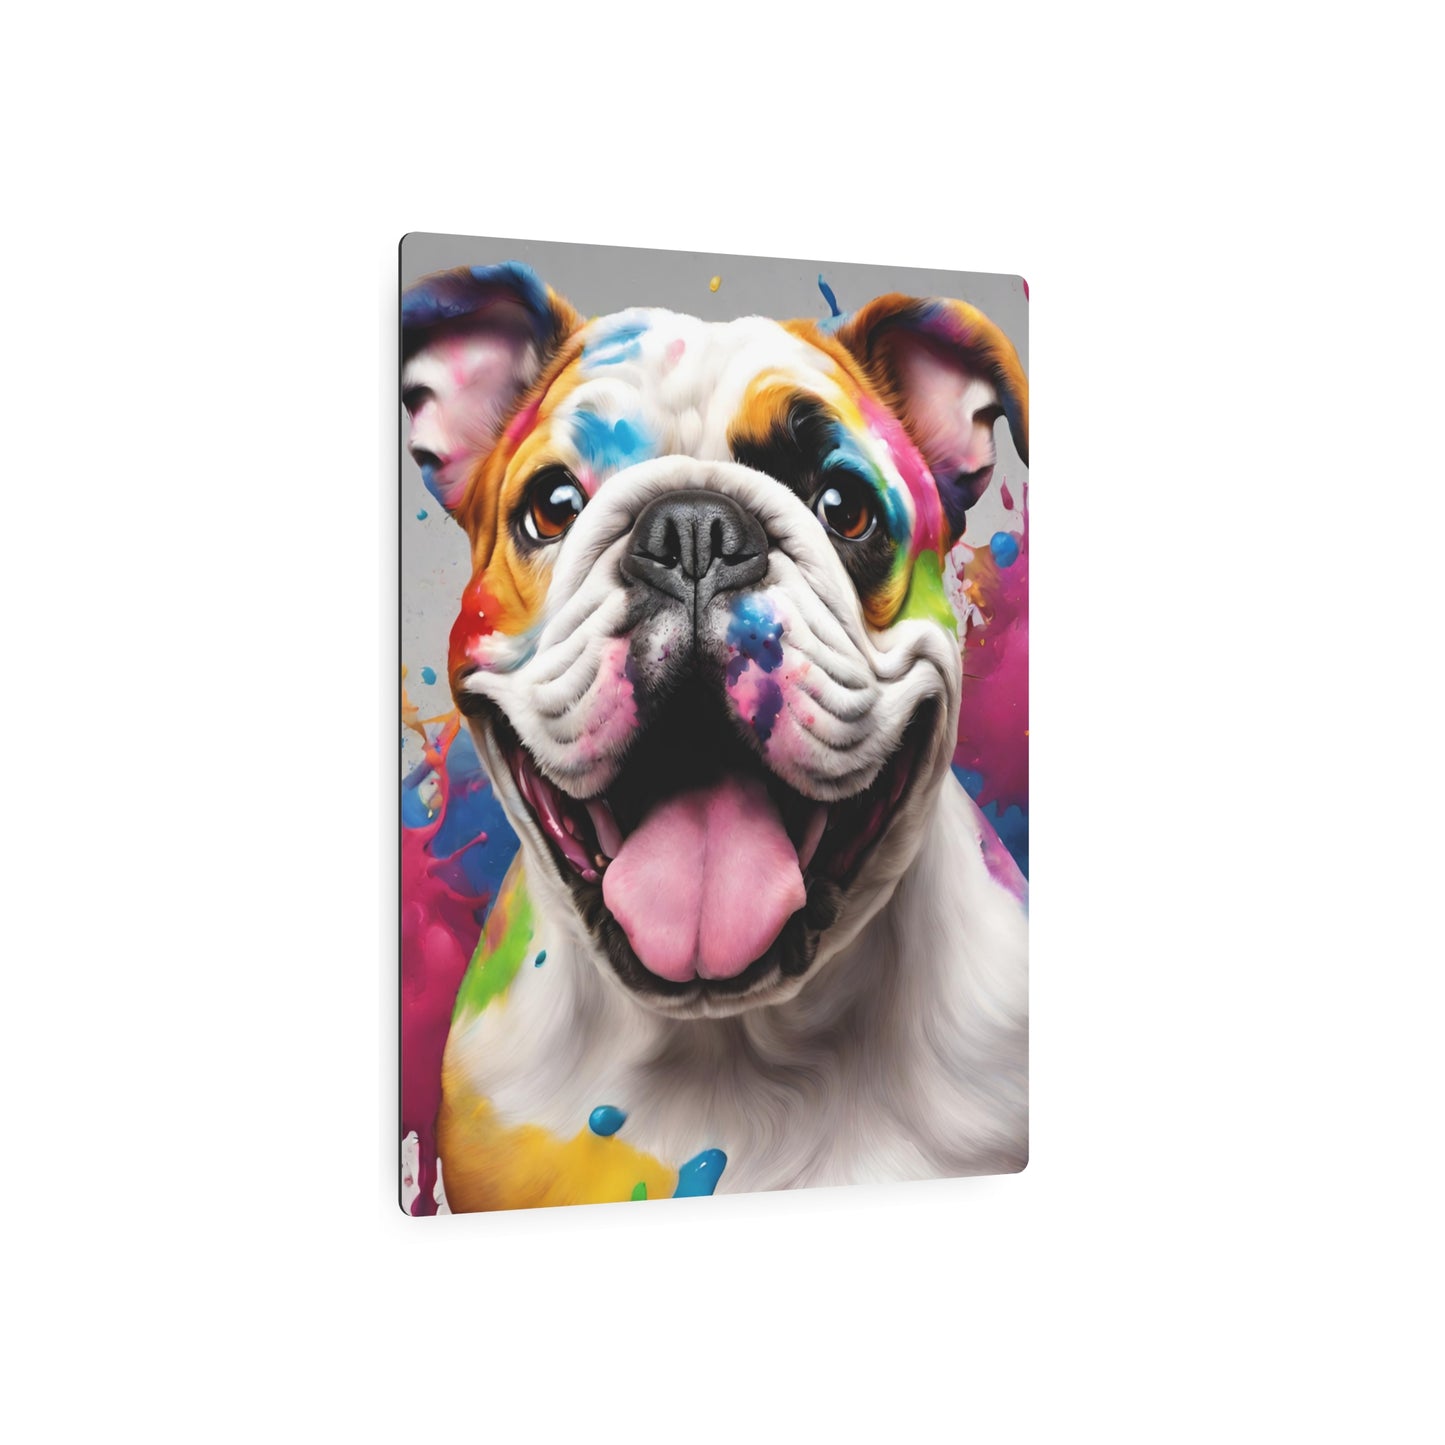 Metal Wall Art Decor featuring a Colorful Bulldog . Mounting tools included. Versatile Home Decor.